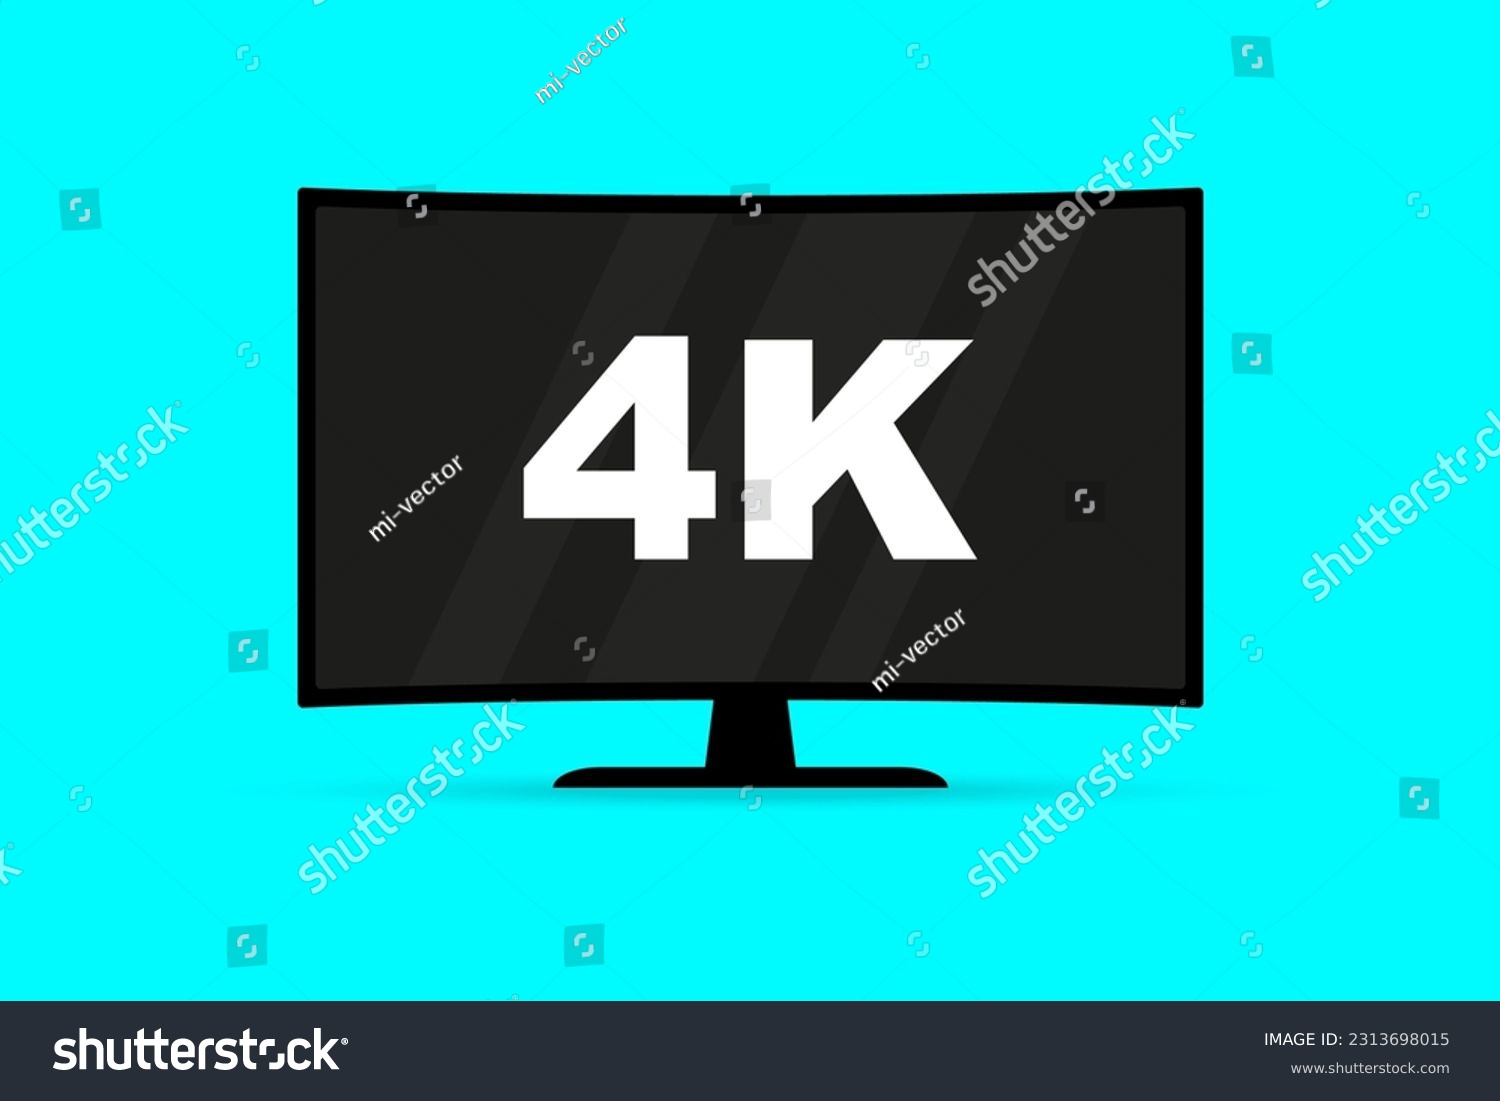 SVG of Flat screen tv with 4k Ultra HD video technology. Digital wide television concept. Led television display with high definition digital tech symbol.  Idea of wide screen computer monitor svg